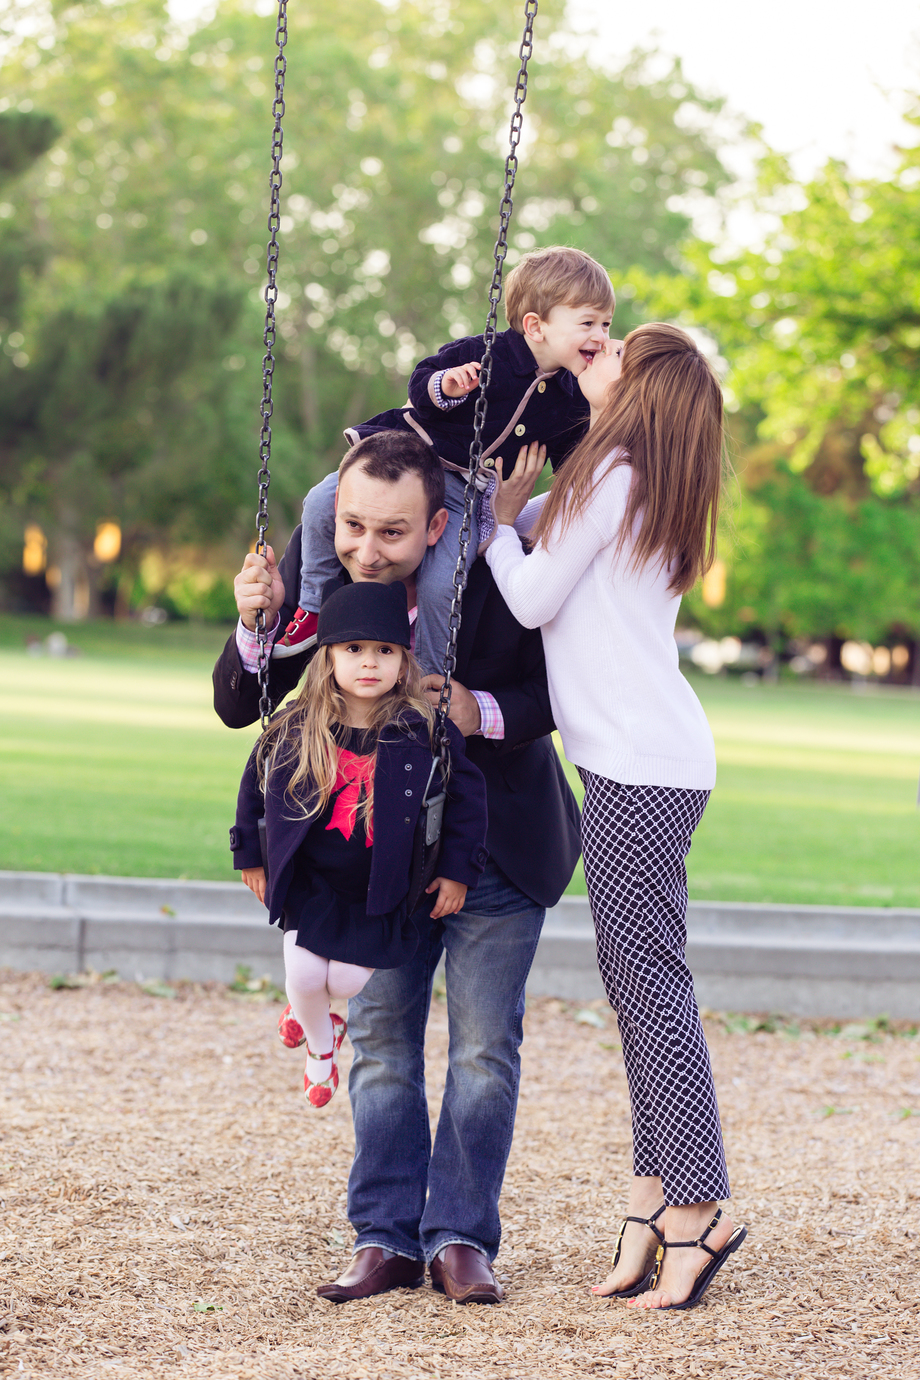 A series of sweet Family portraits in Mitchell park, Palo Alto that will make you smile